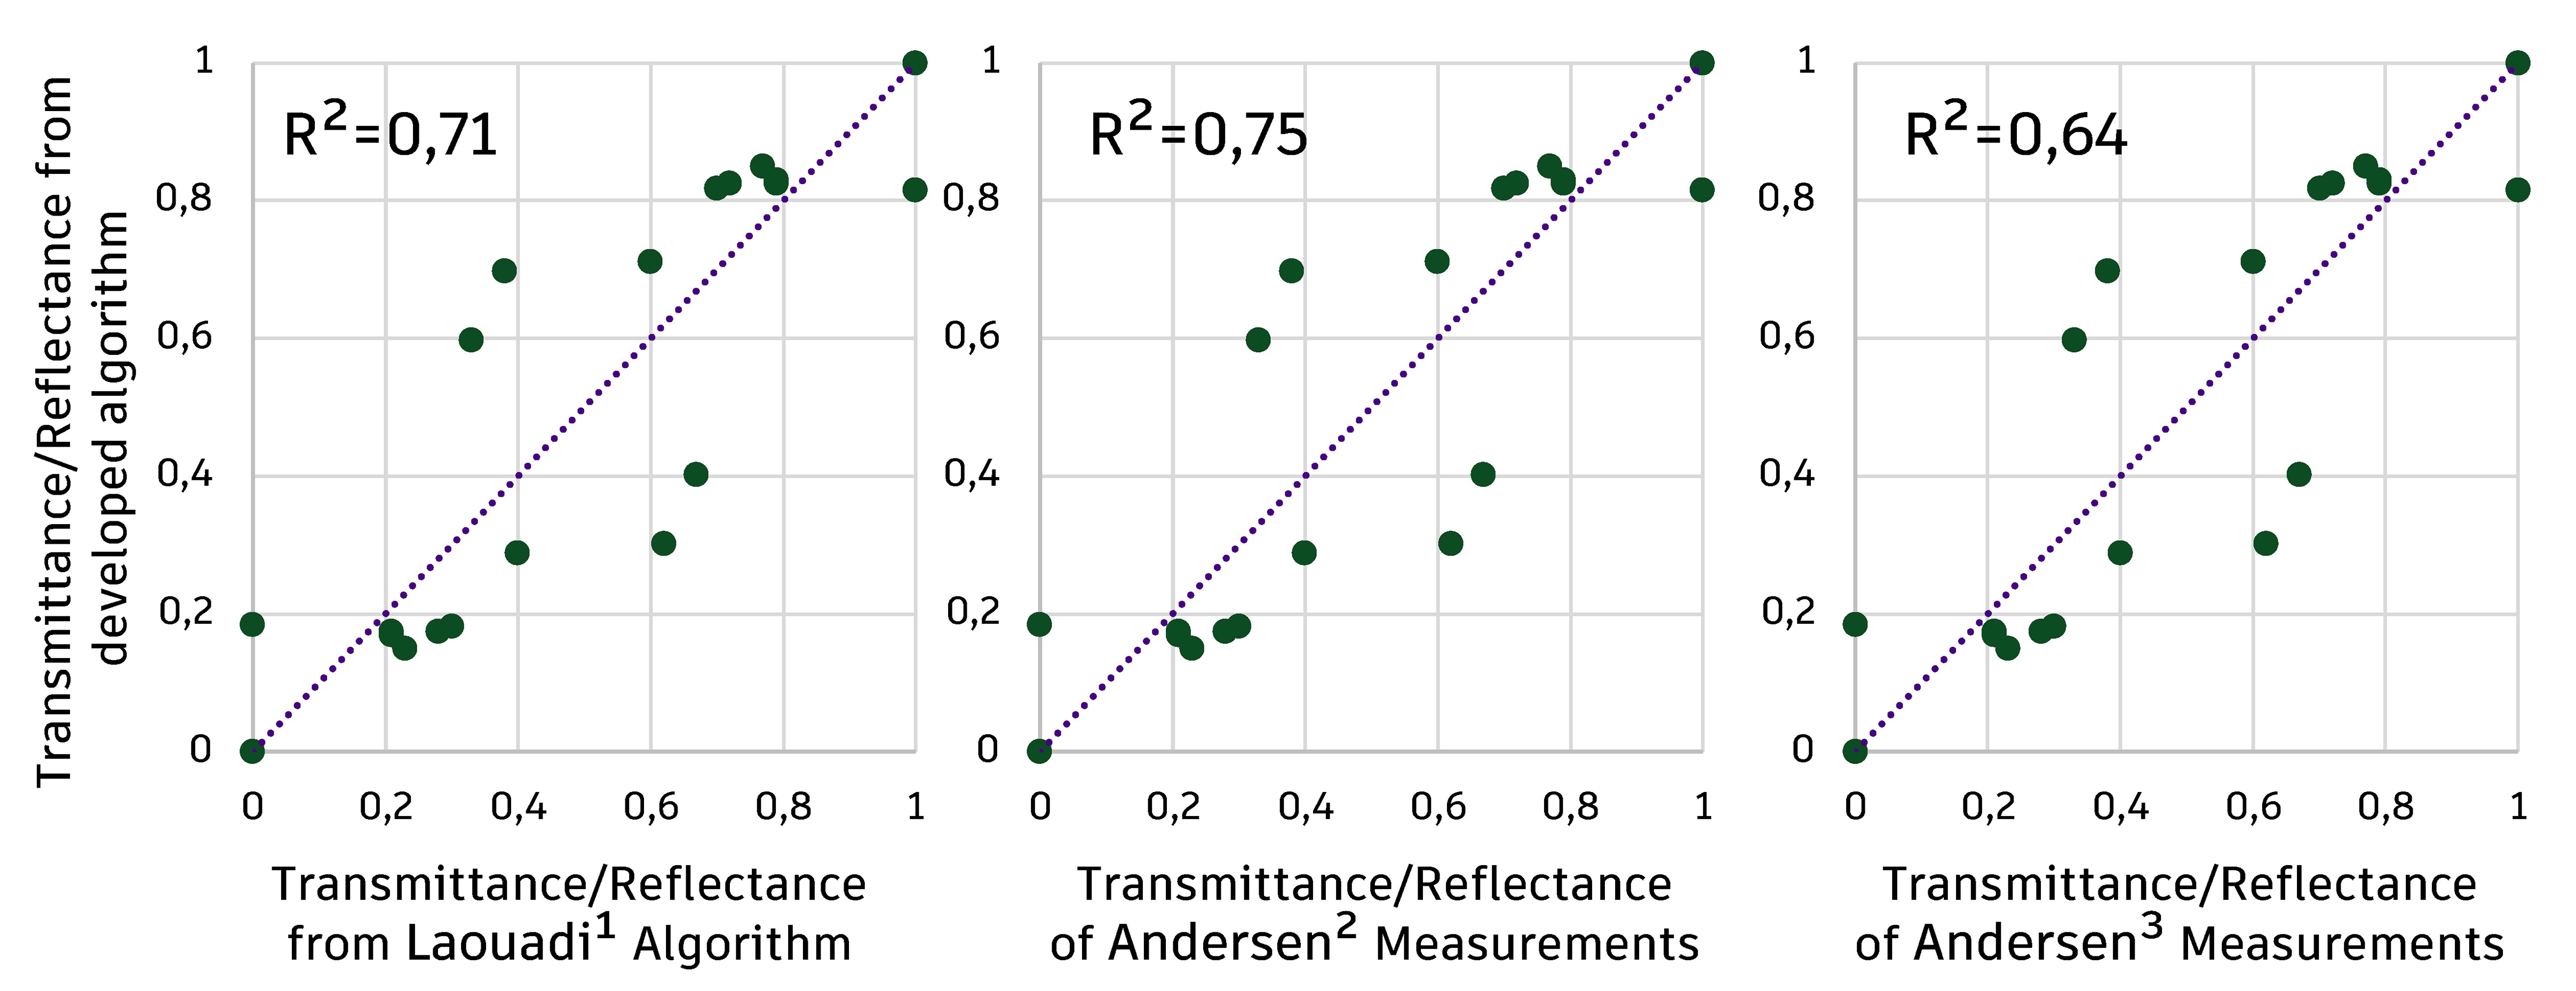 Correlation between predicted and calculated reflectance/transmittance for prismatic glass with rays on the flat face using references of 1Laouadi et al. [46] and data from 2,3Andersen et al. [32].